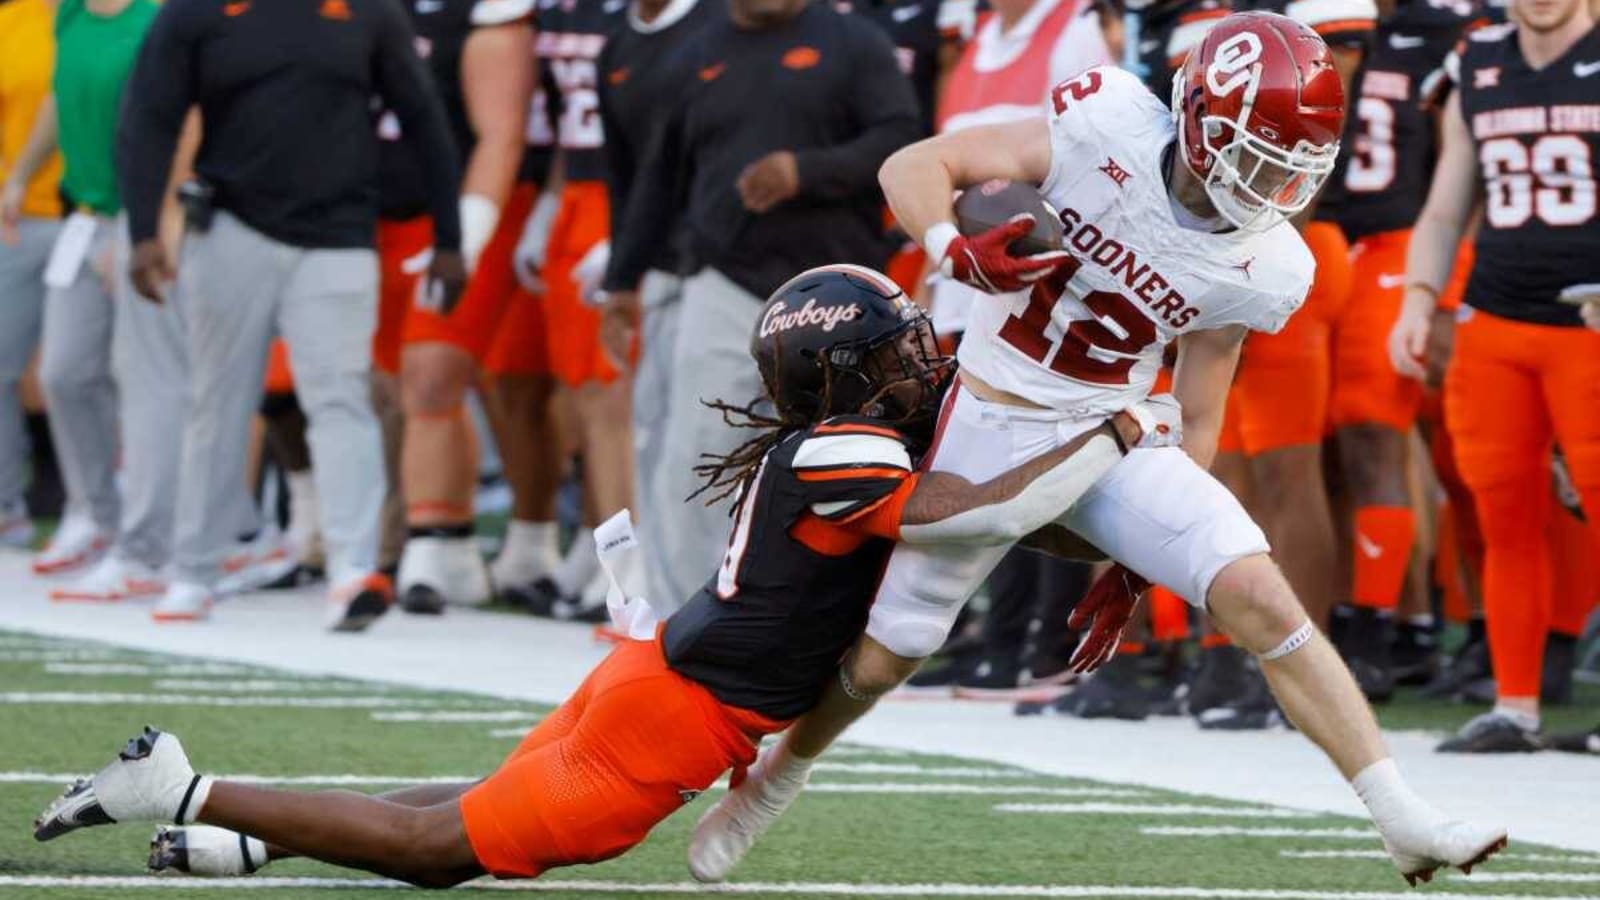 In Bedlam Defeat, Drake Stoops Turns in Career Performance